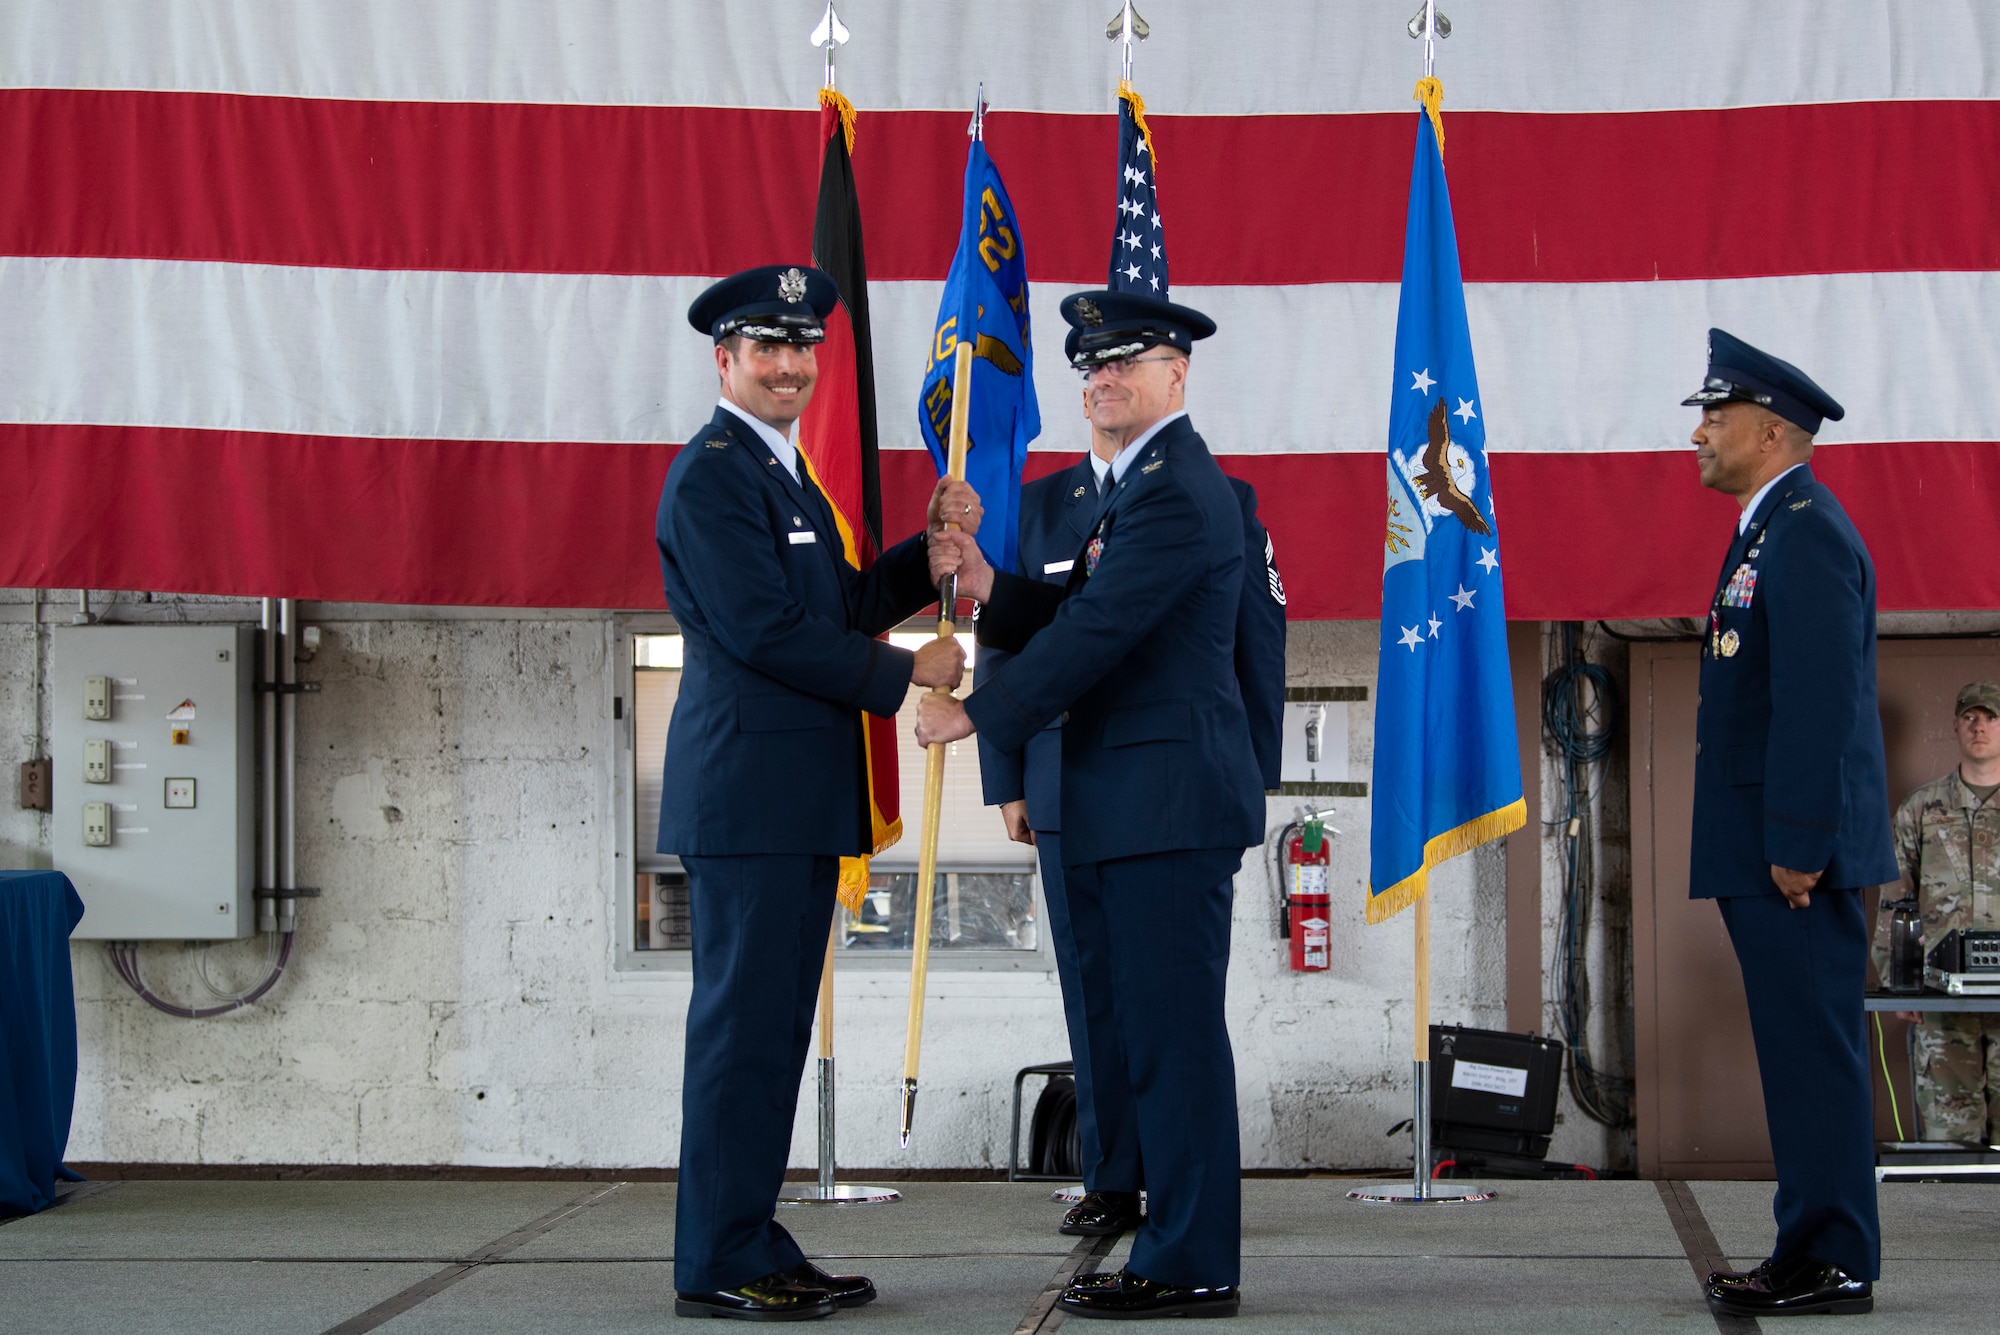 The 52nd MMG changes command.